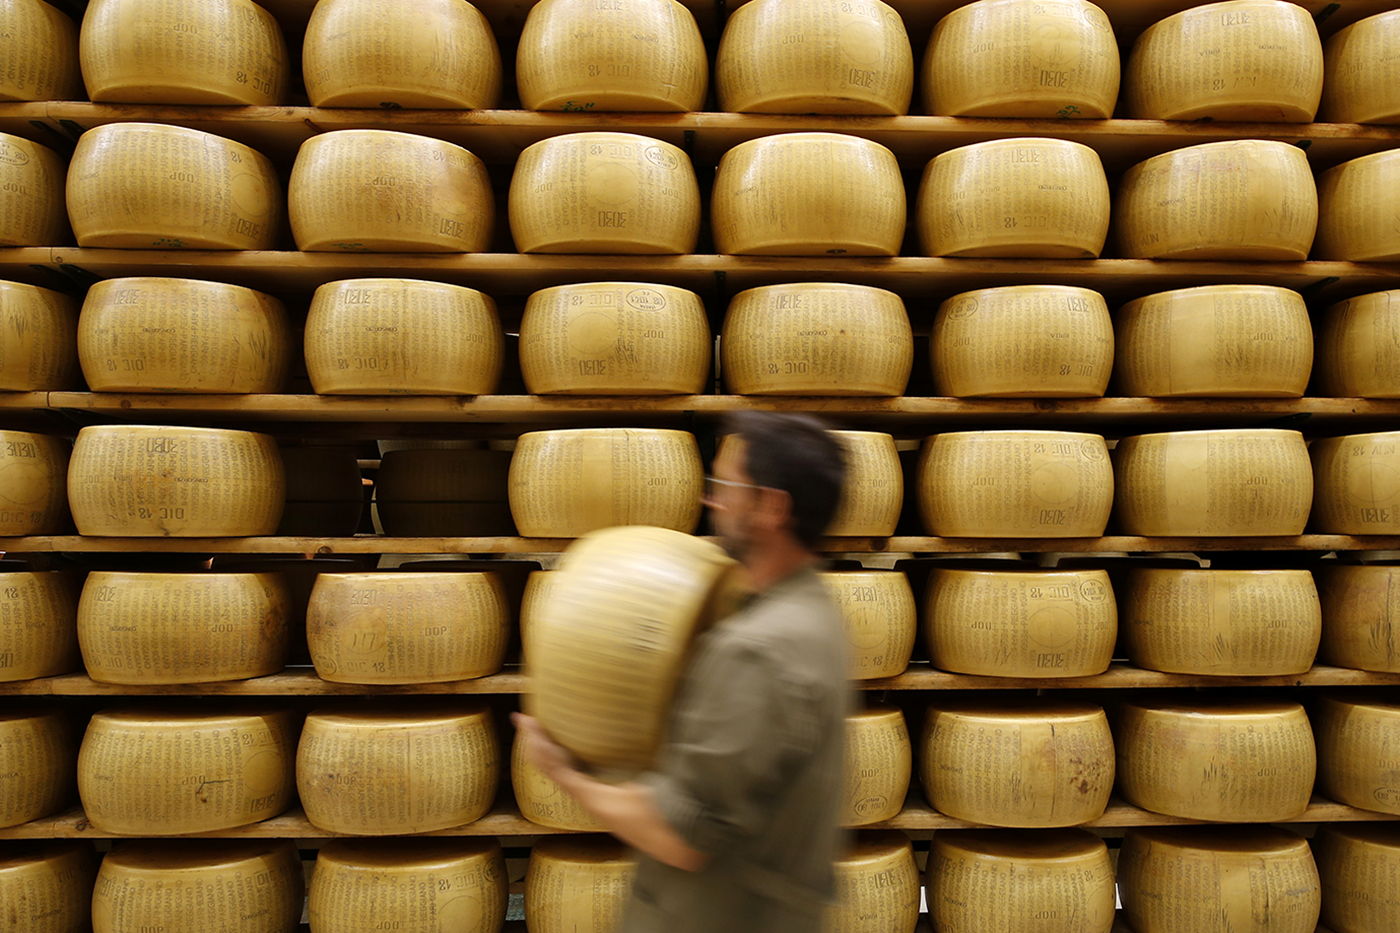 Picture of cheese wheels in Italy.